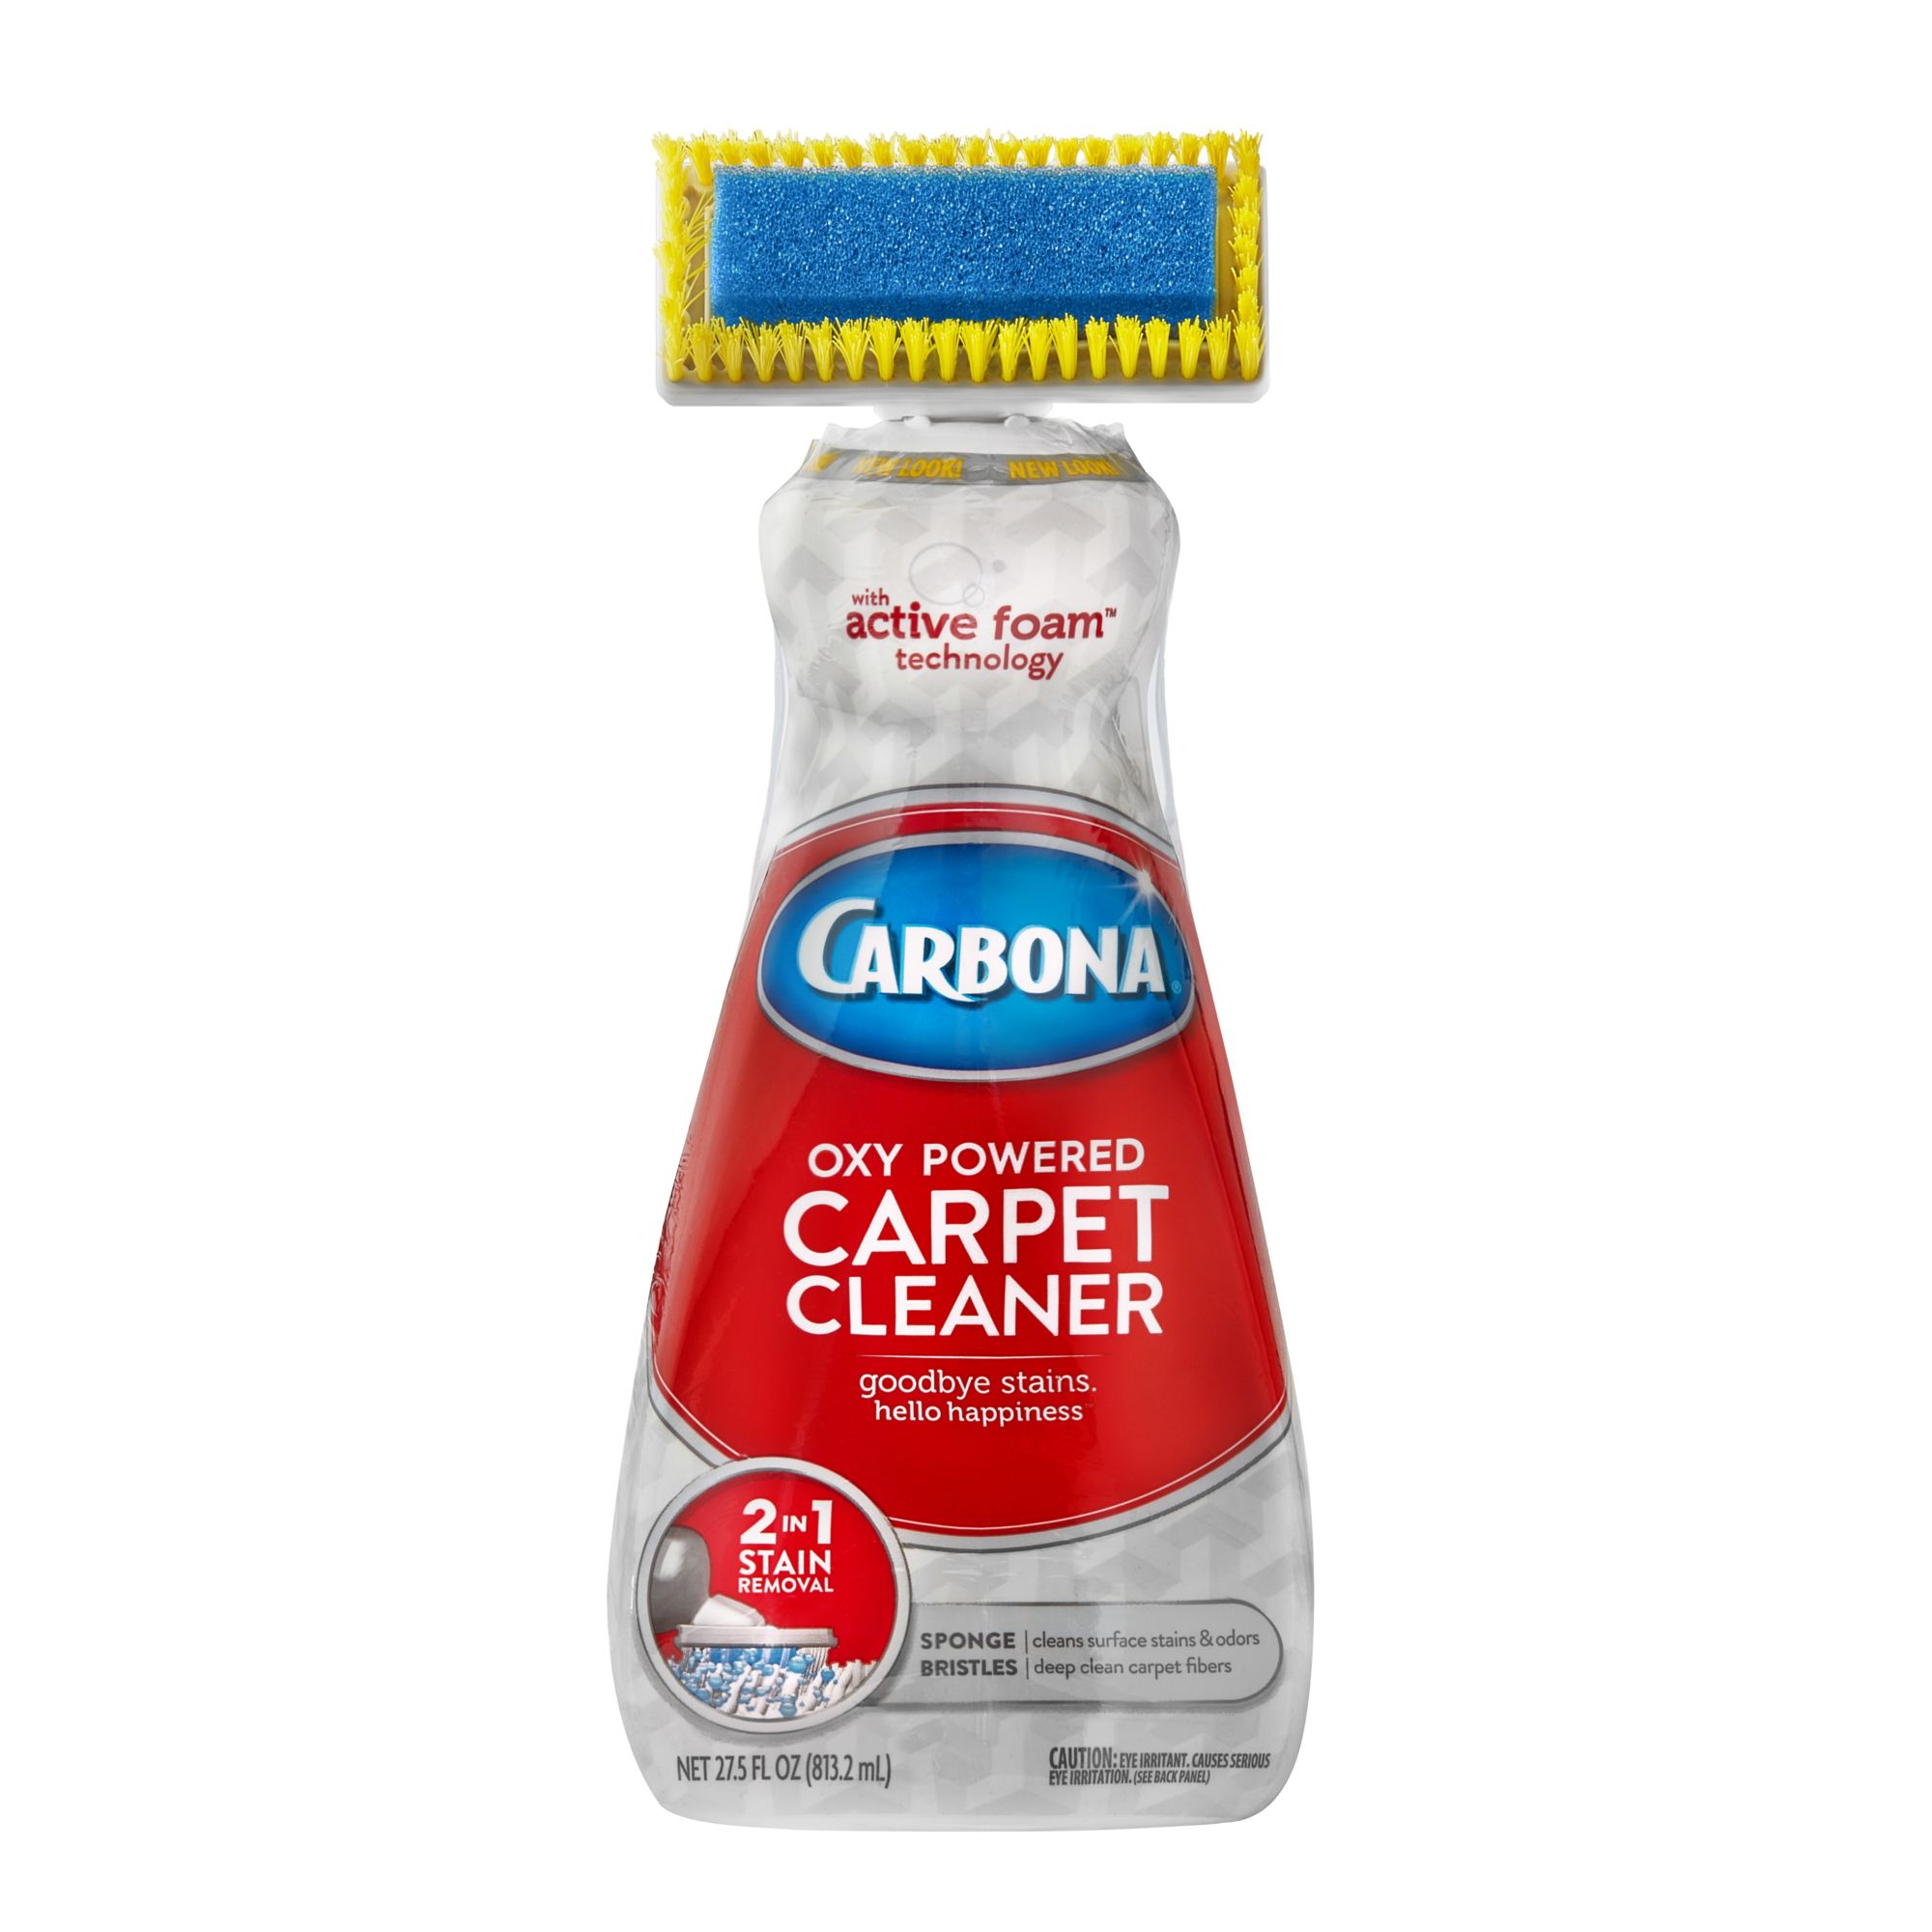 Carbona Pet Stain, Carbona Carpet Cleaner, Carbona Upholstery Cleaners, Carbona Spot Lifter, Carbona Cleaning